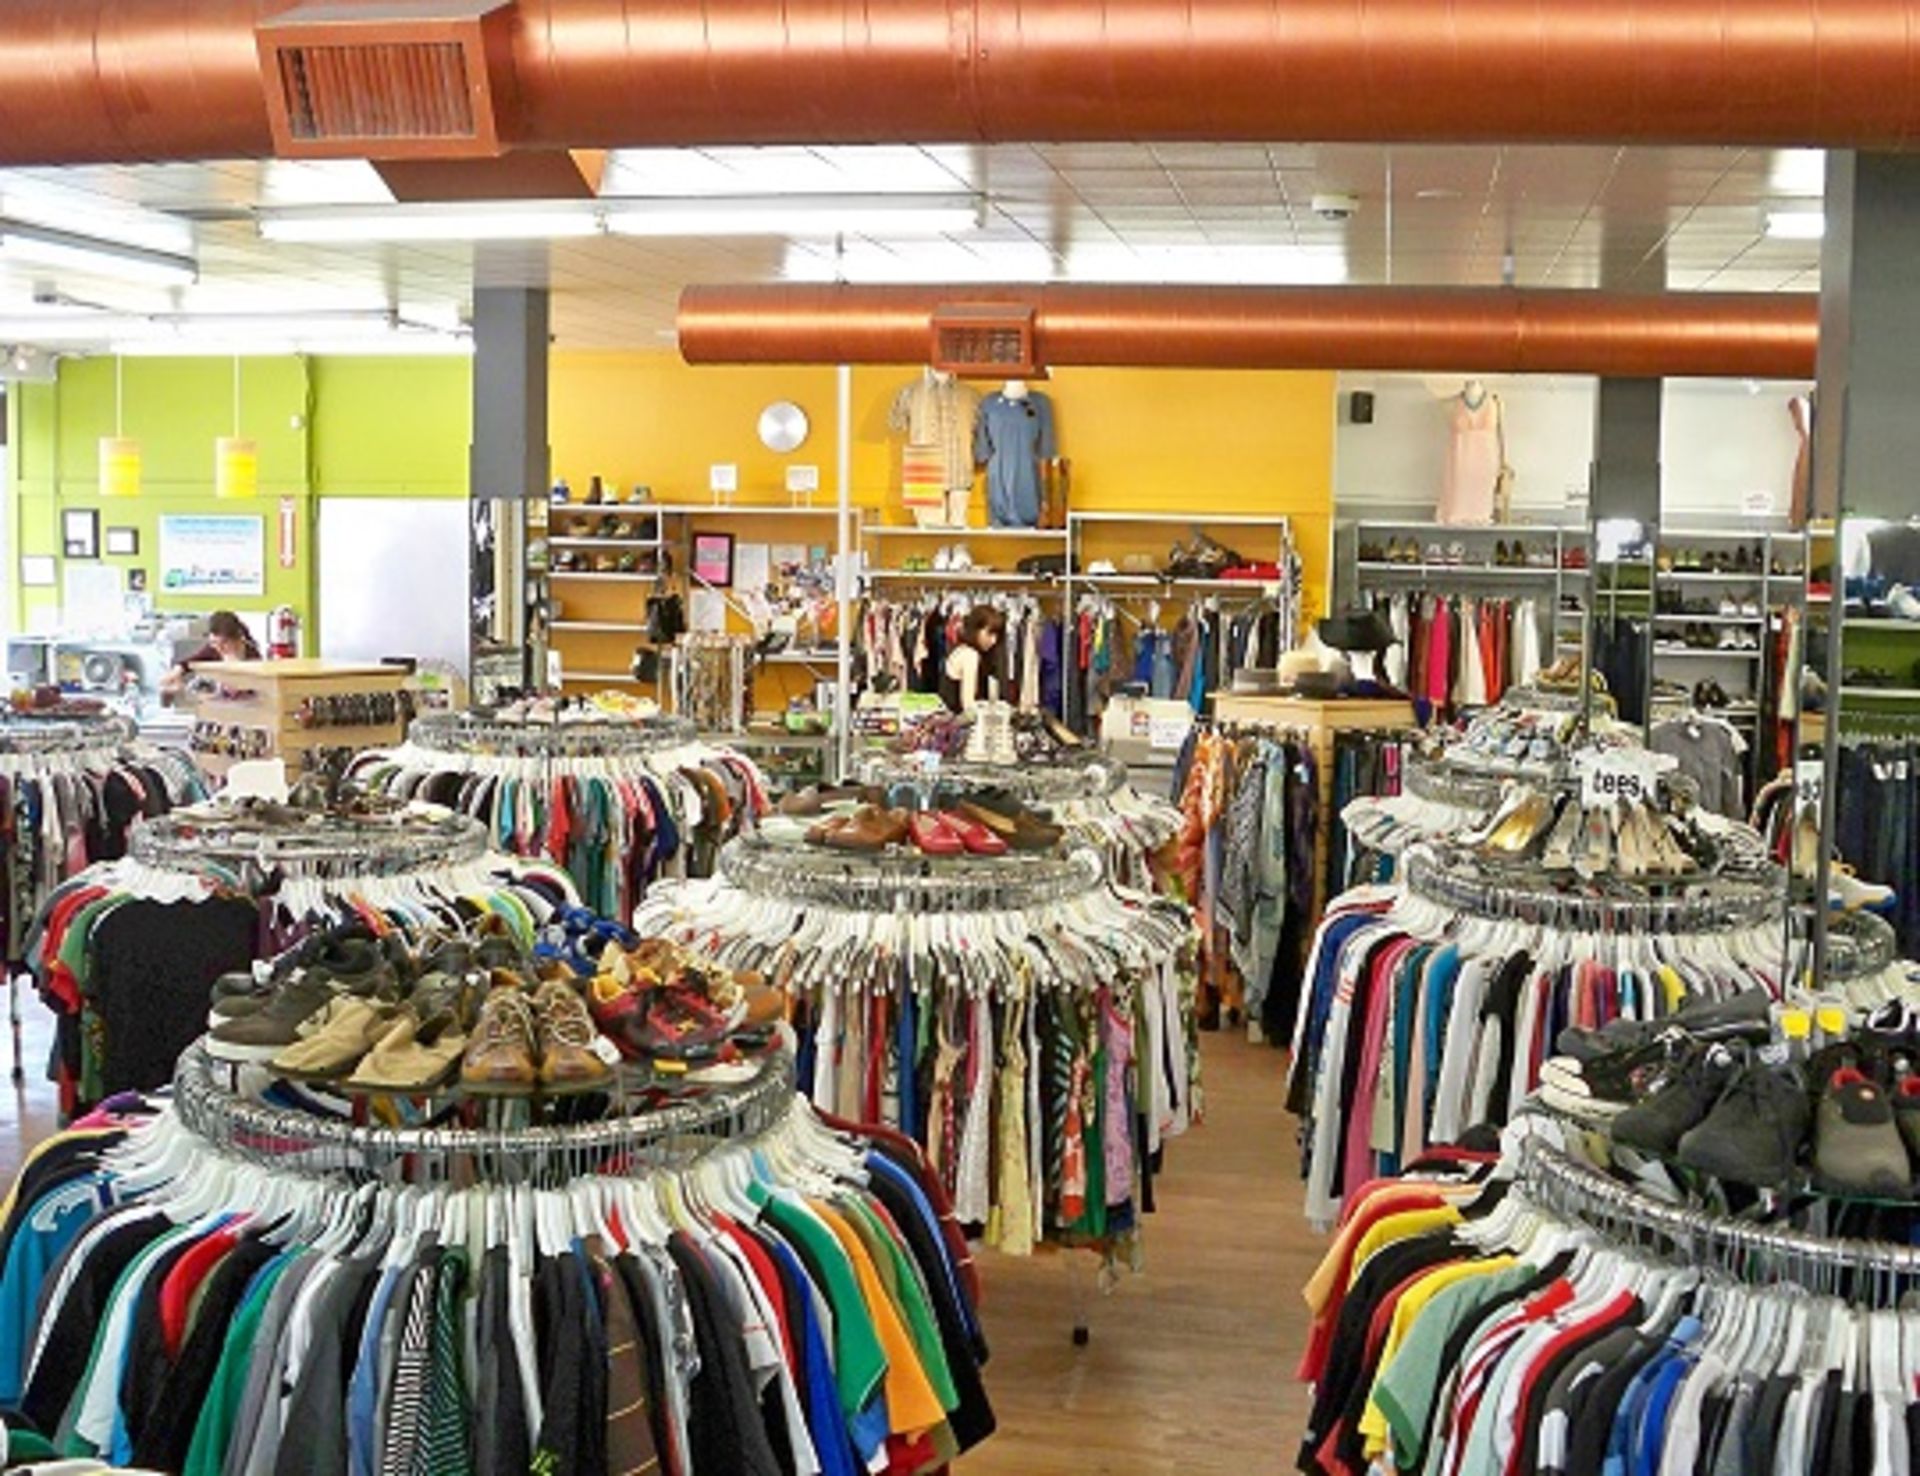 3000 POUNDS OF USED CLOTHING FROM CLOSED RETAIL THRIFT STORE